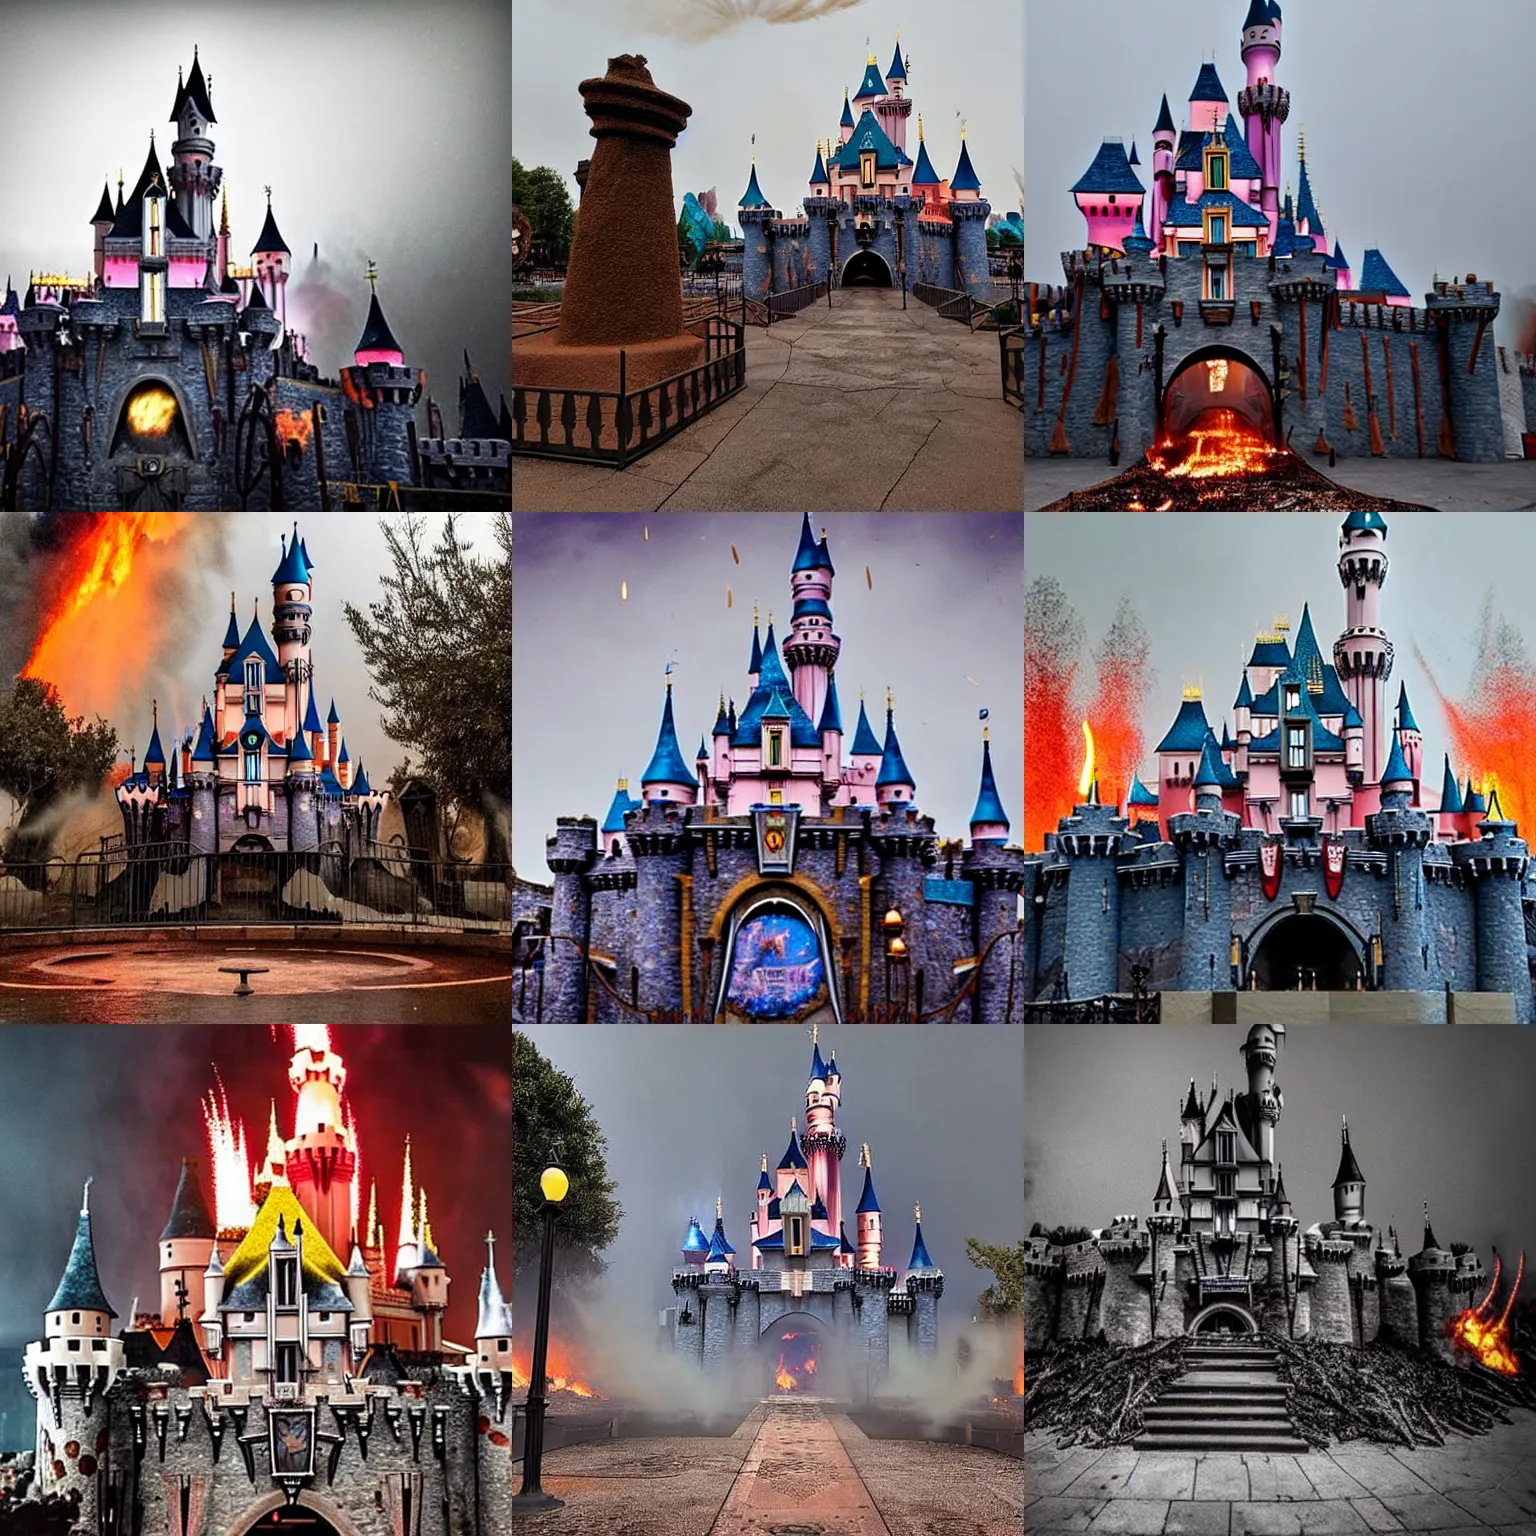 Prompt: desolate empty Disneyland castle ruins on fire engulfed in flames everywhere, burning at night, fireworks in the sky raining down glowing embers and burning debris, lots of smoke, fire, fire, fire, night, night, night. photo. apocalyptic. doomsday. cursed images, found footage.